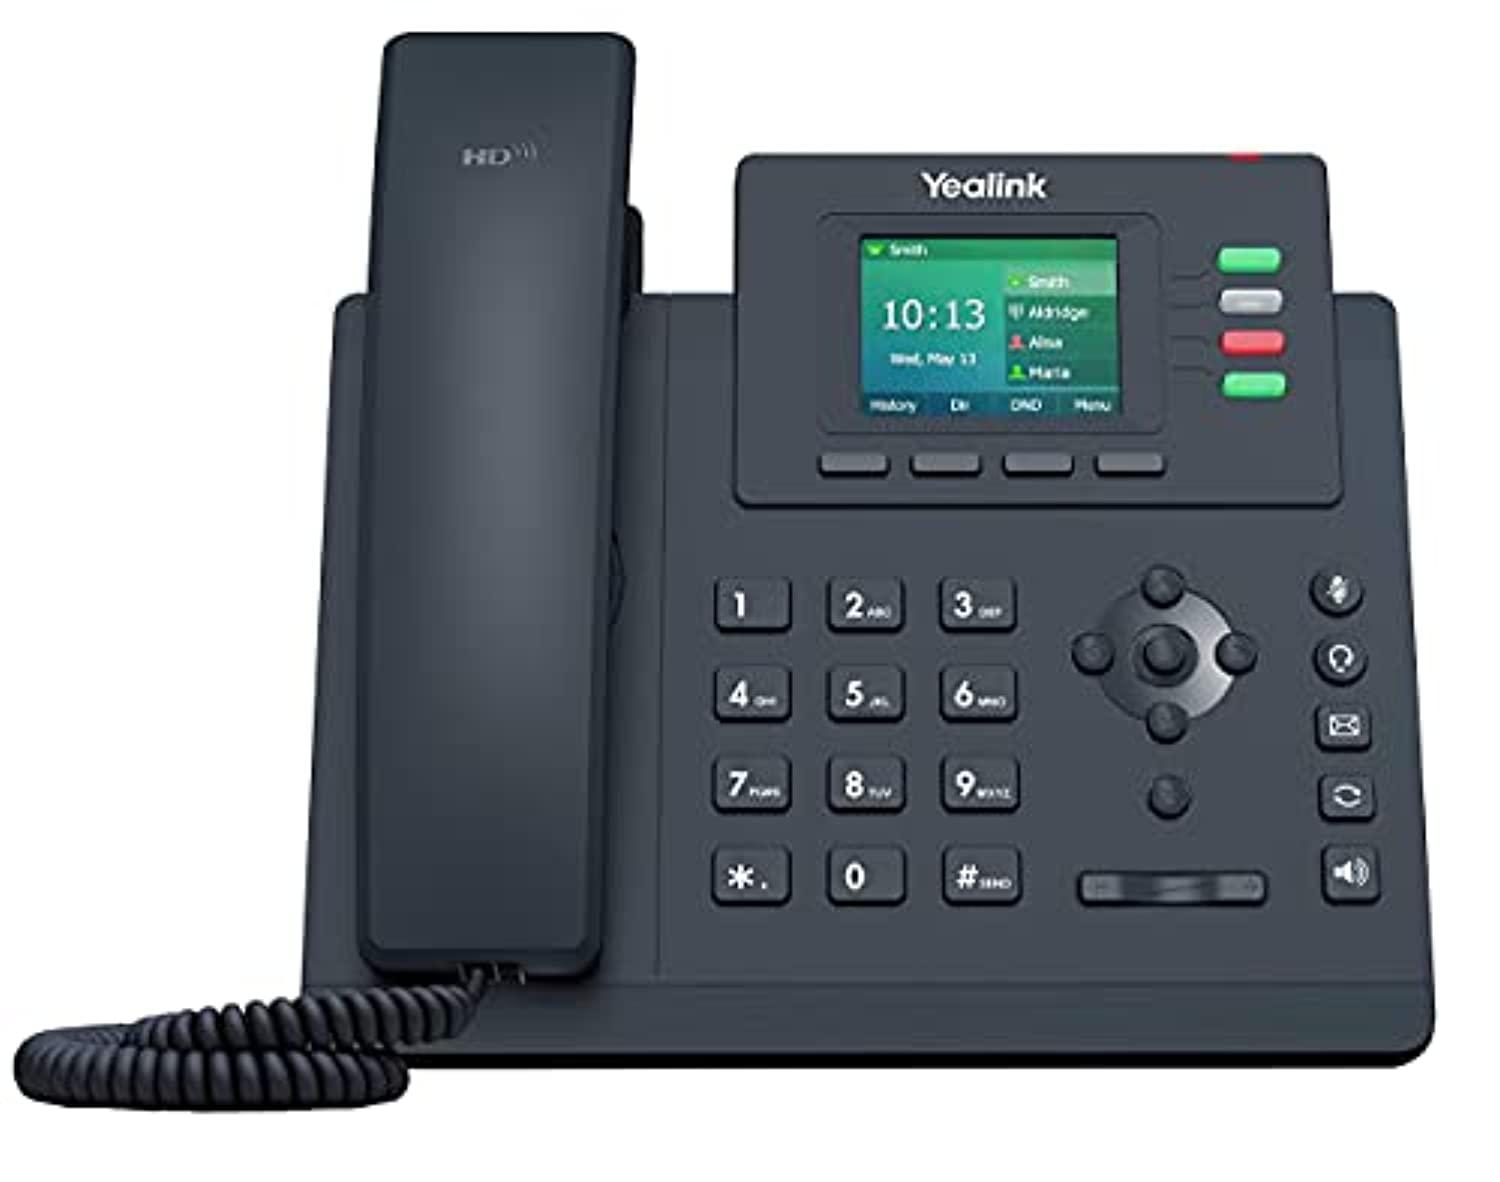 yealink t33g ip phone, 4 voip accounts. 2.4-inch color display. dual-port gigabit ethernet, 802.3af poe, power adapter not in